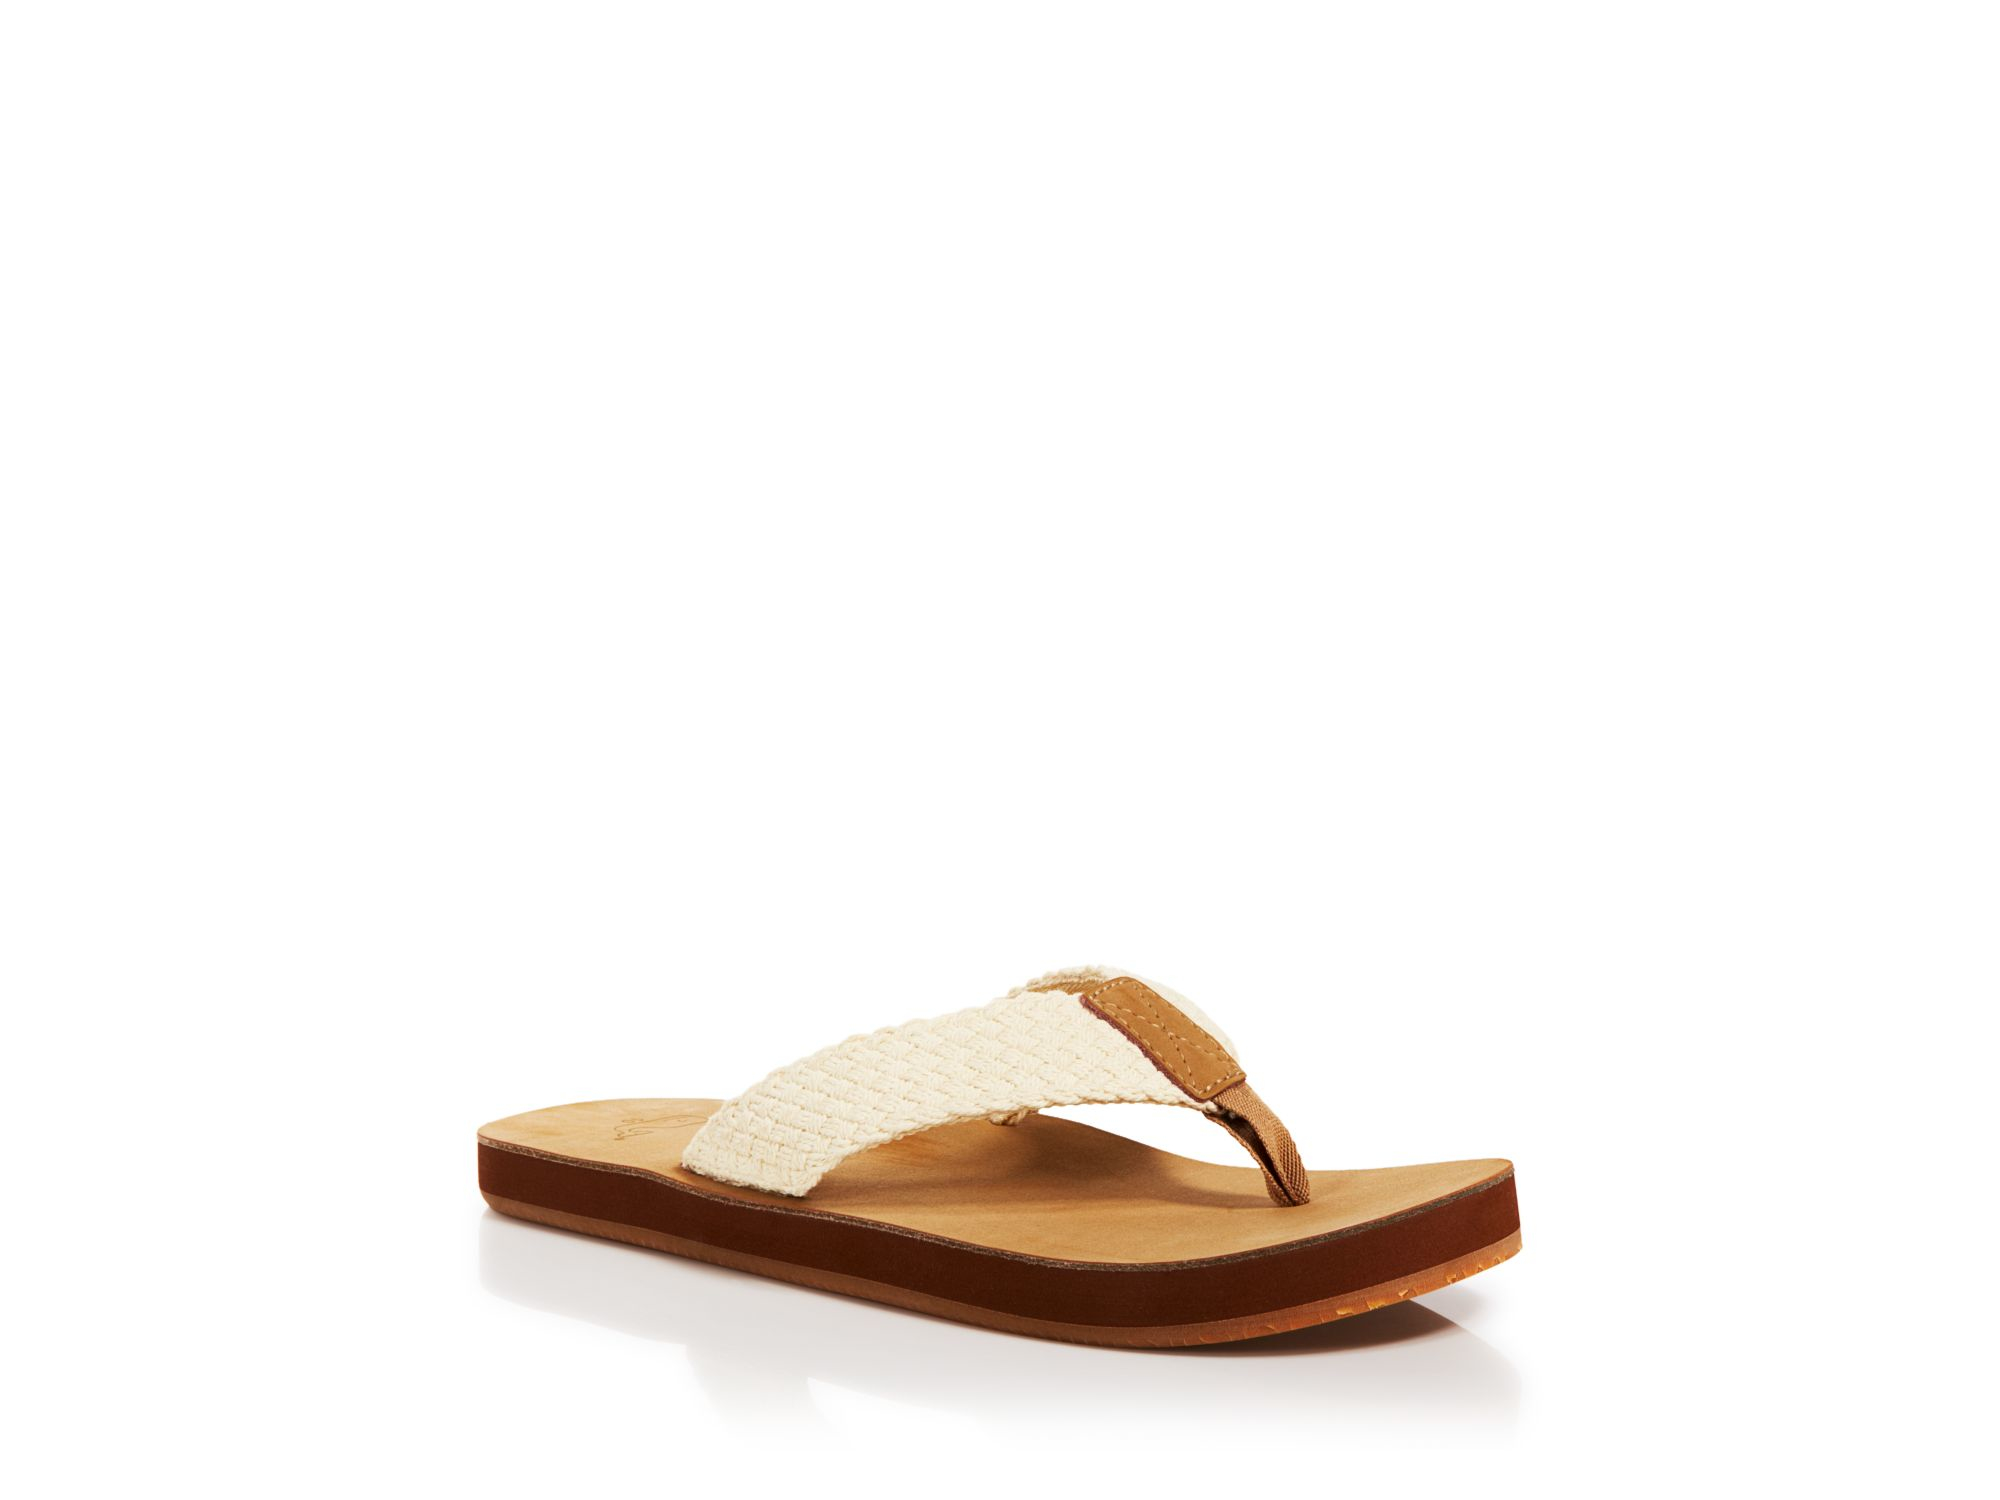 Lyst - Vineyard Vines Woven Leather And Canvas Flip Flops in Natural ...